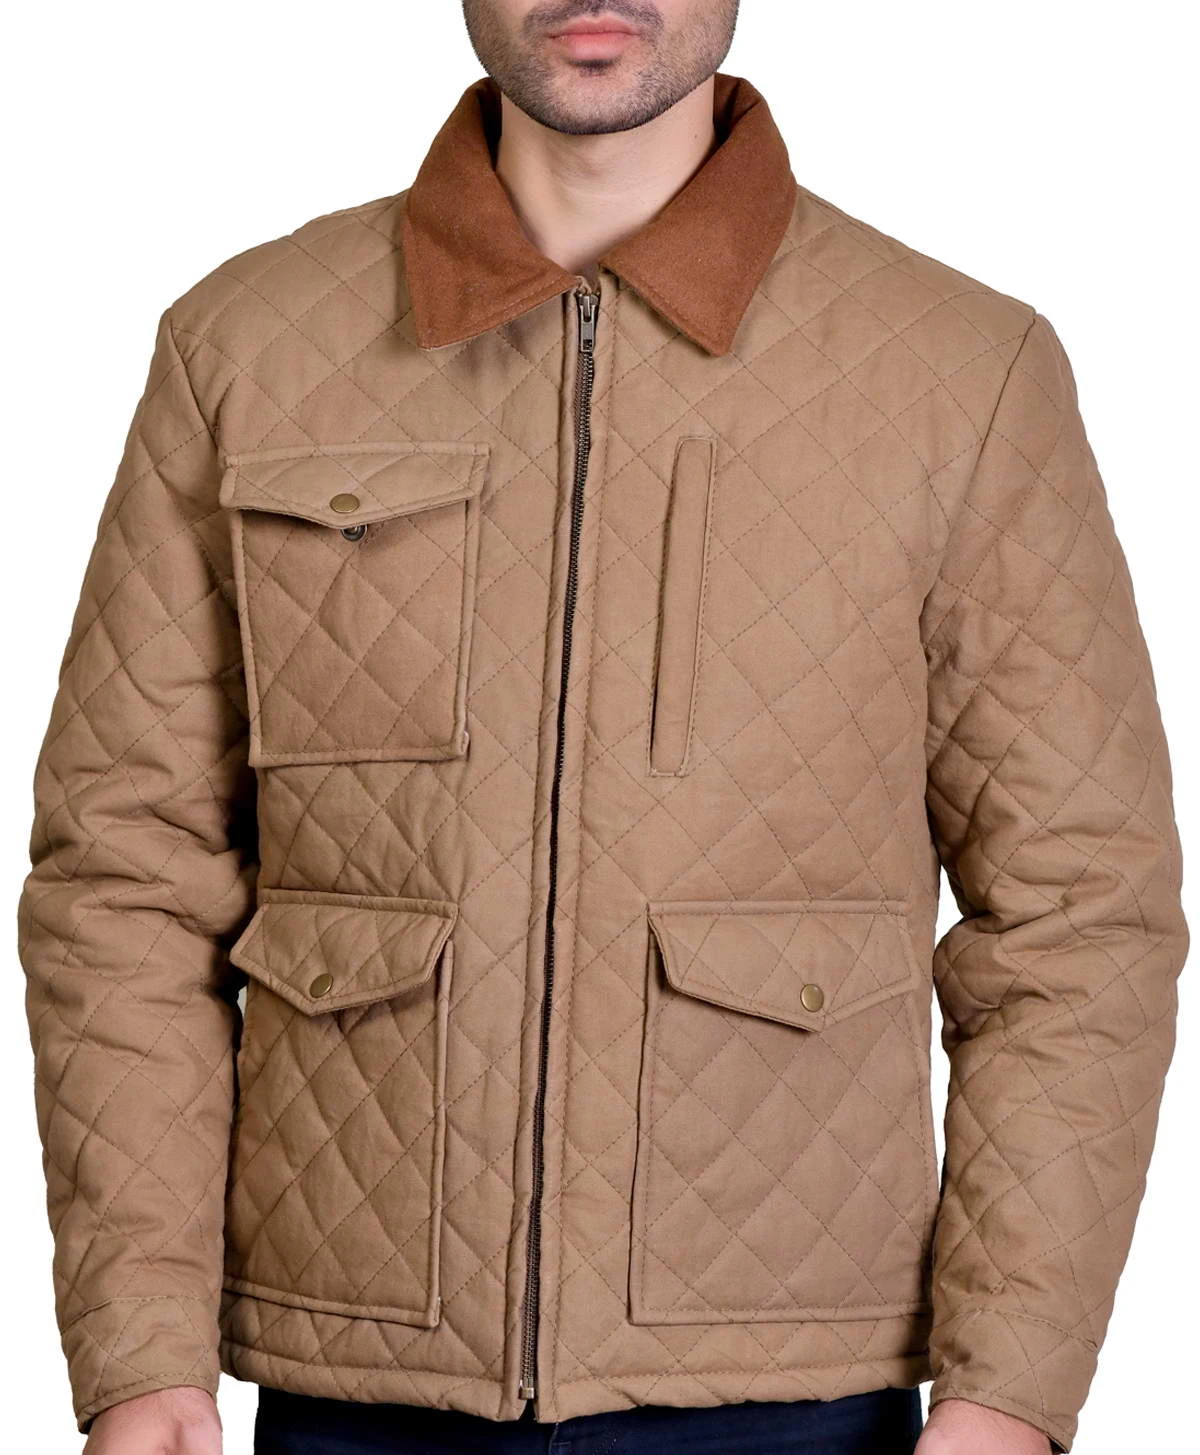 British Jackets Yellowstone S04 John Dutton Brown Quilted Jacket | Kevin Costner Yellowstone Brown Quilted Cotton Jacket